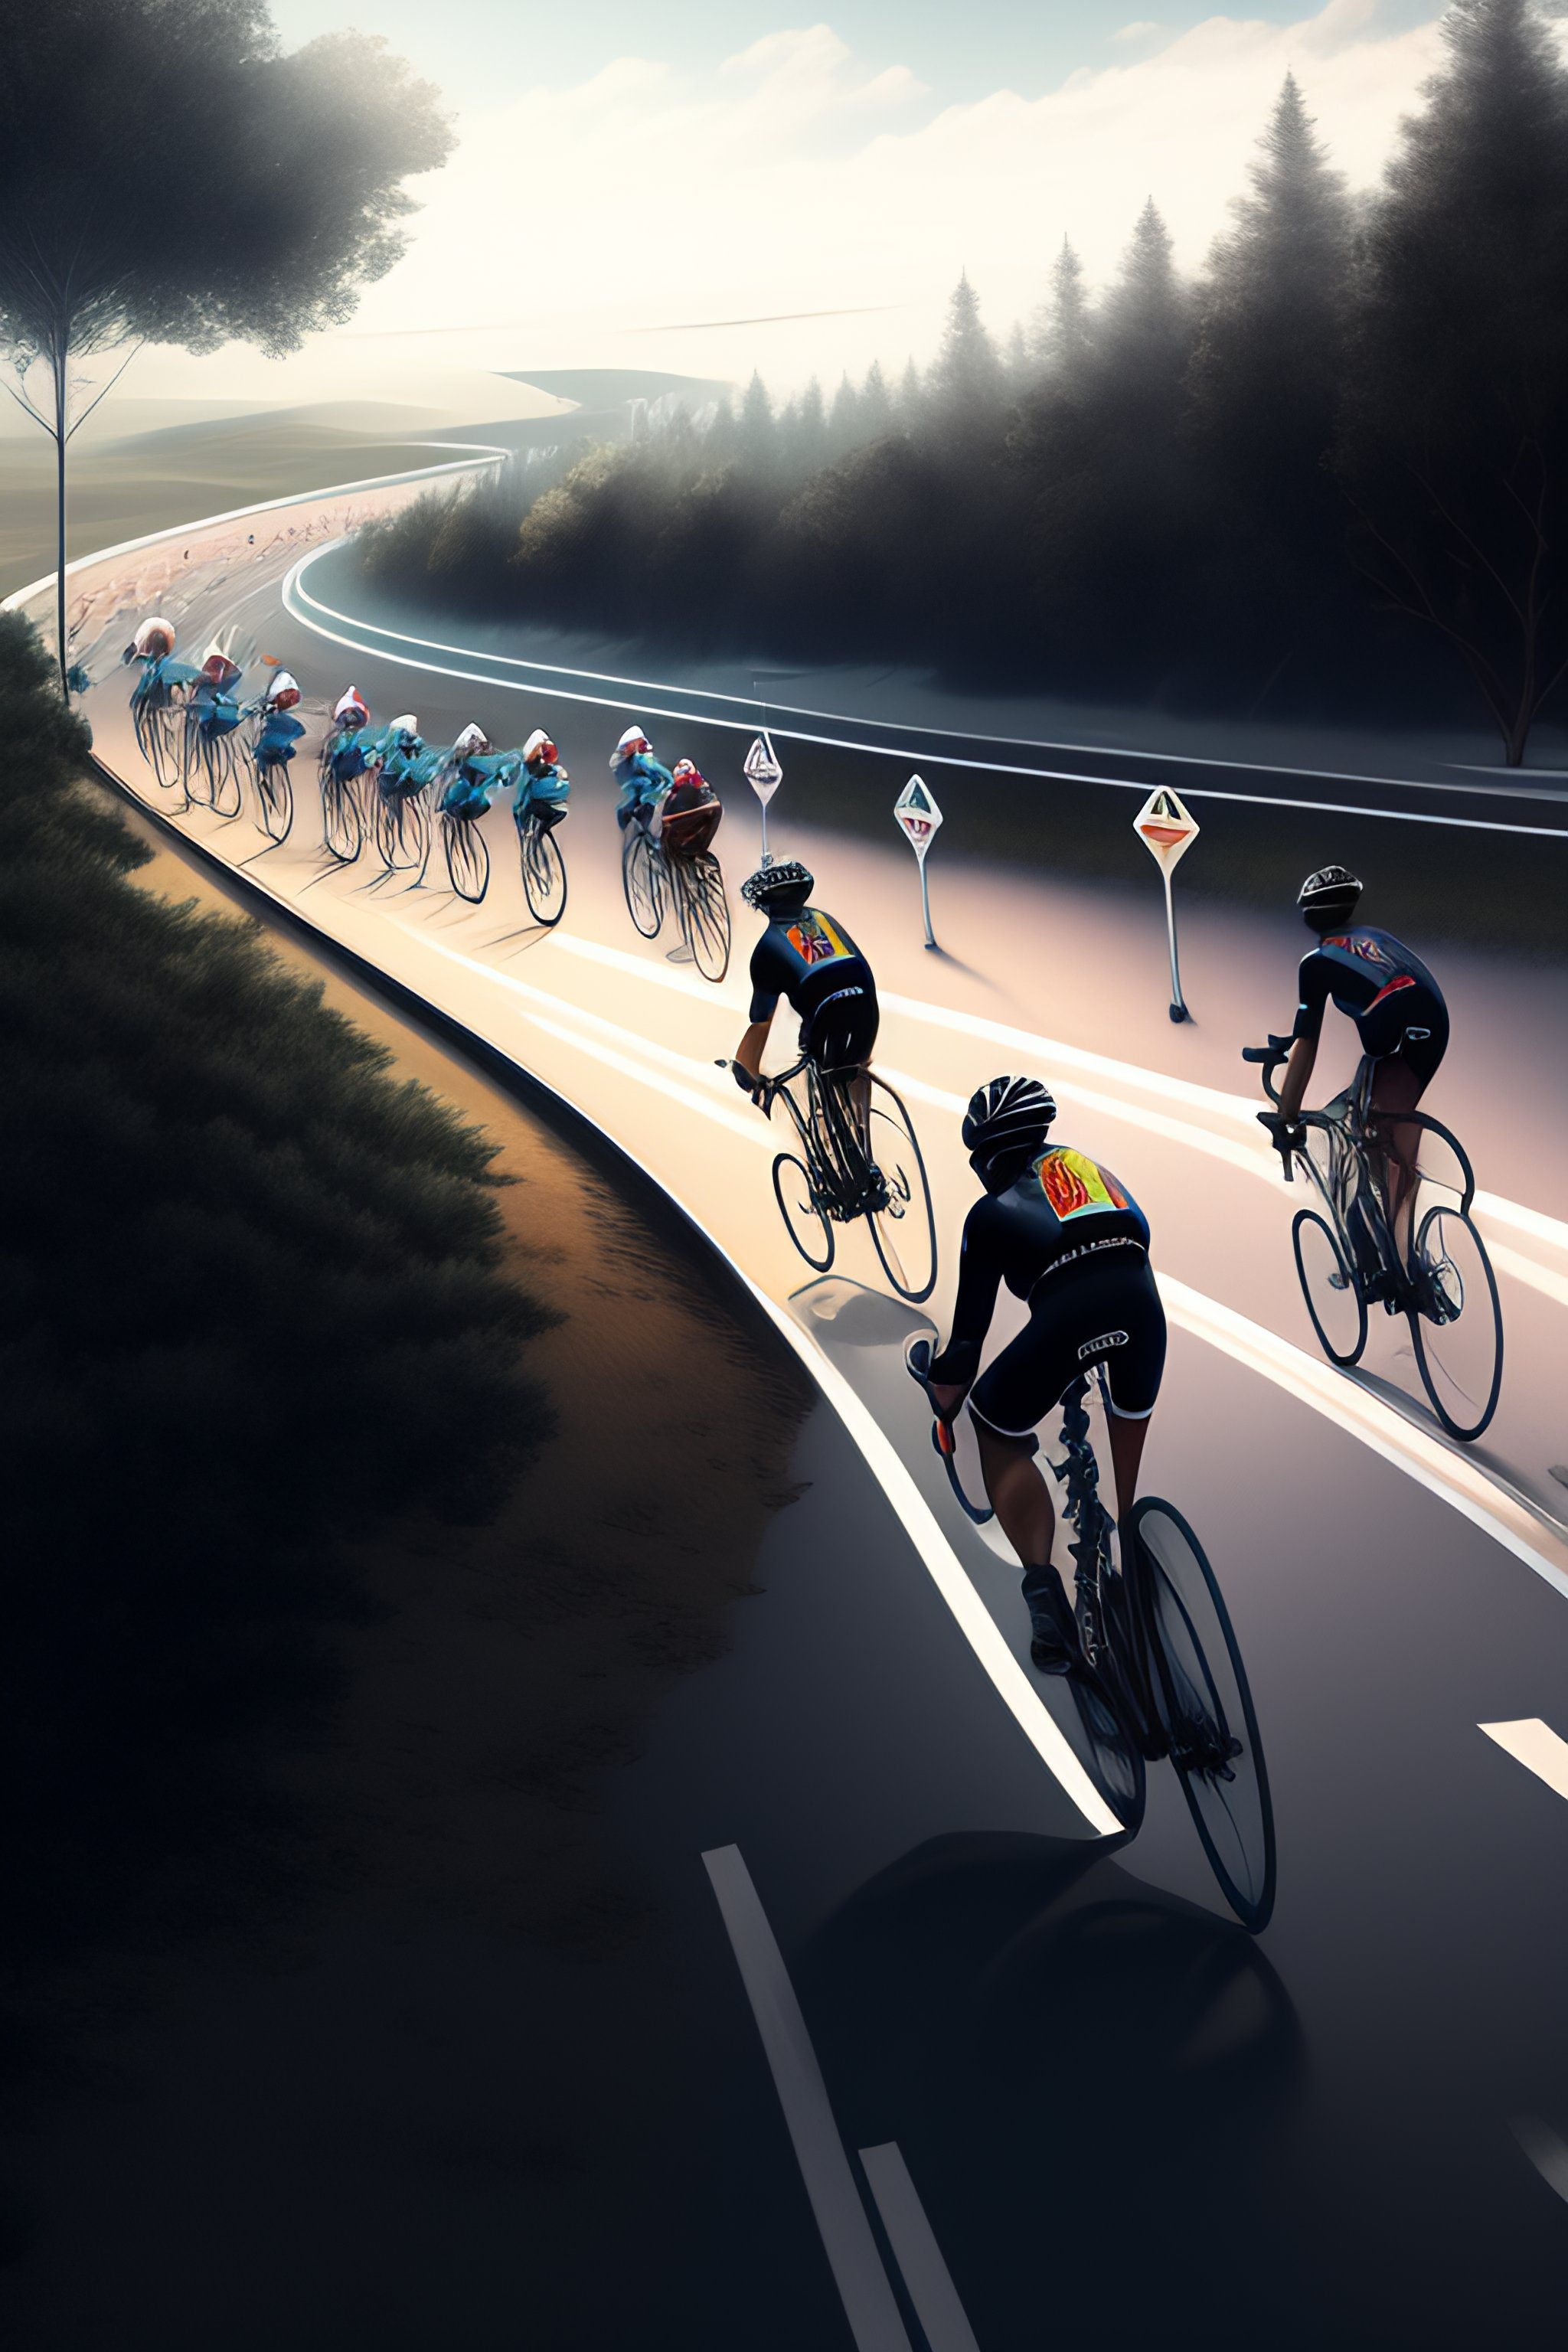 Cycling team as an illustration to the dev teams that you can find on Nordics.io